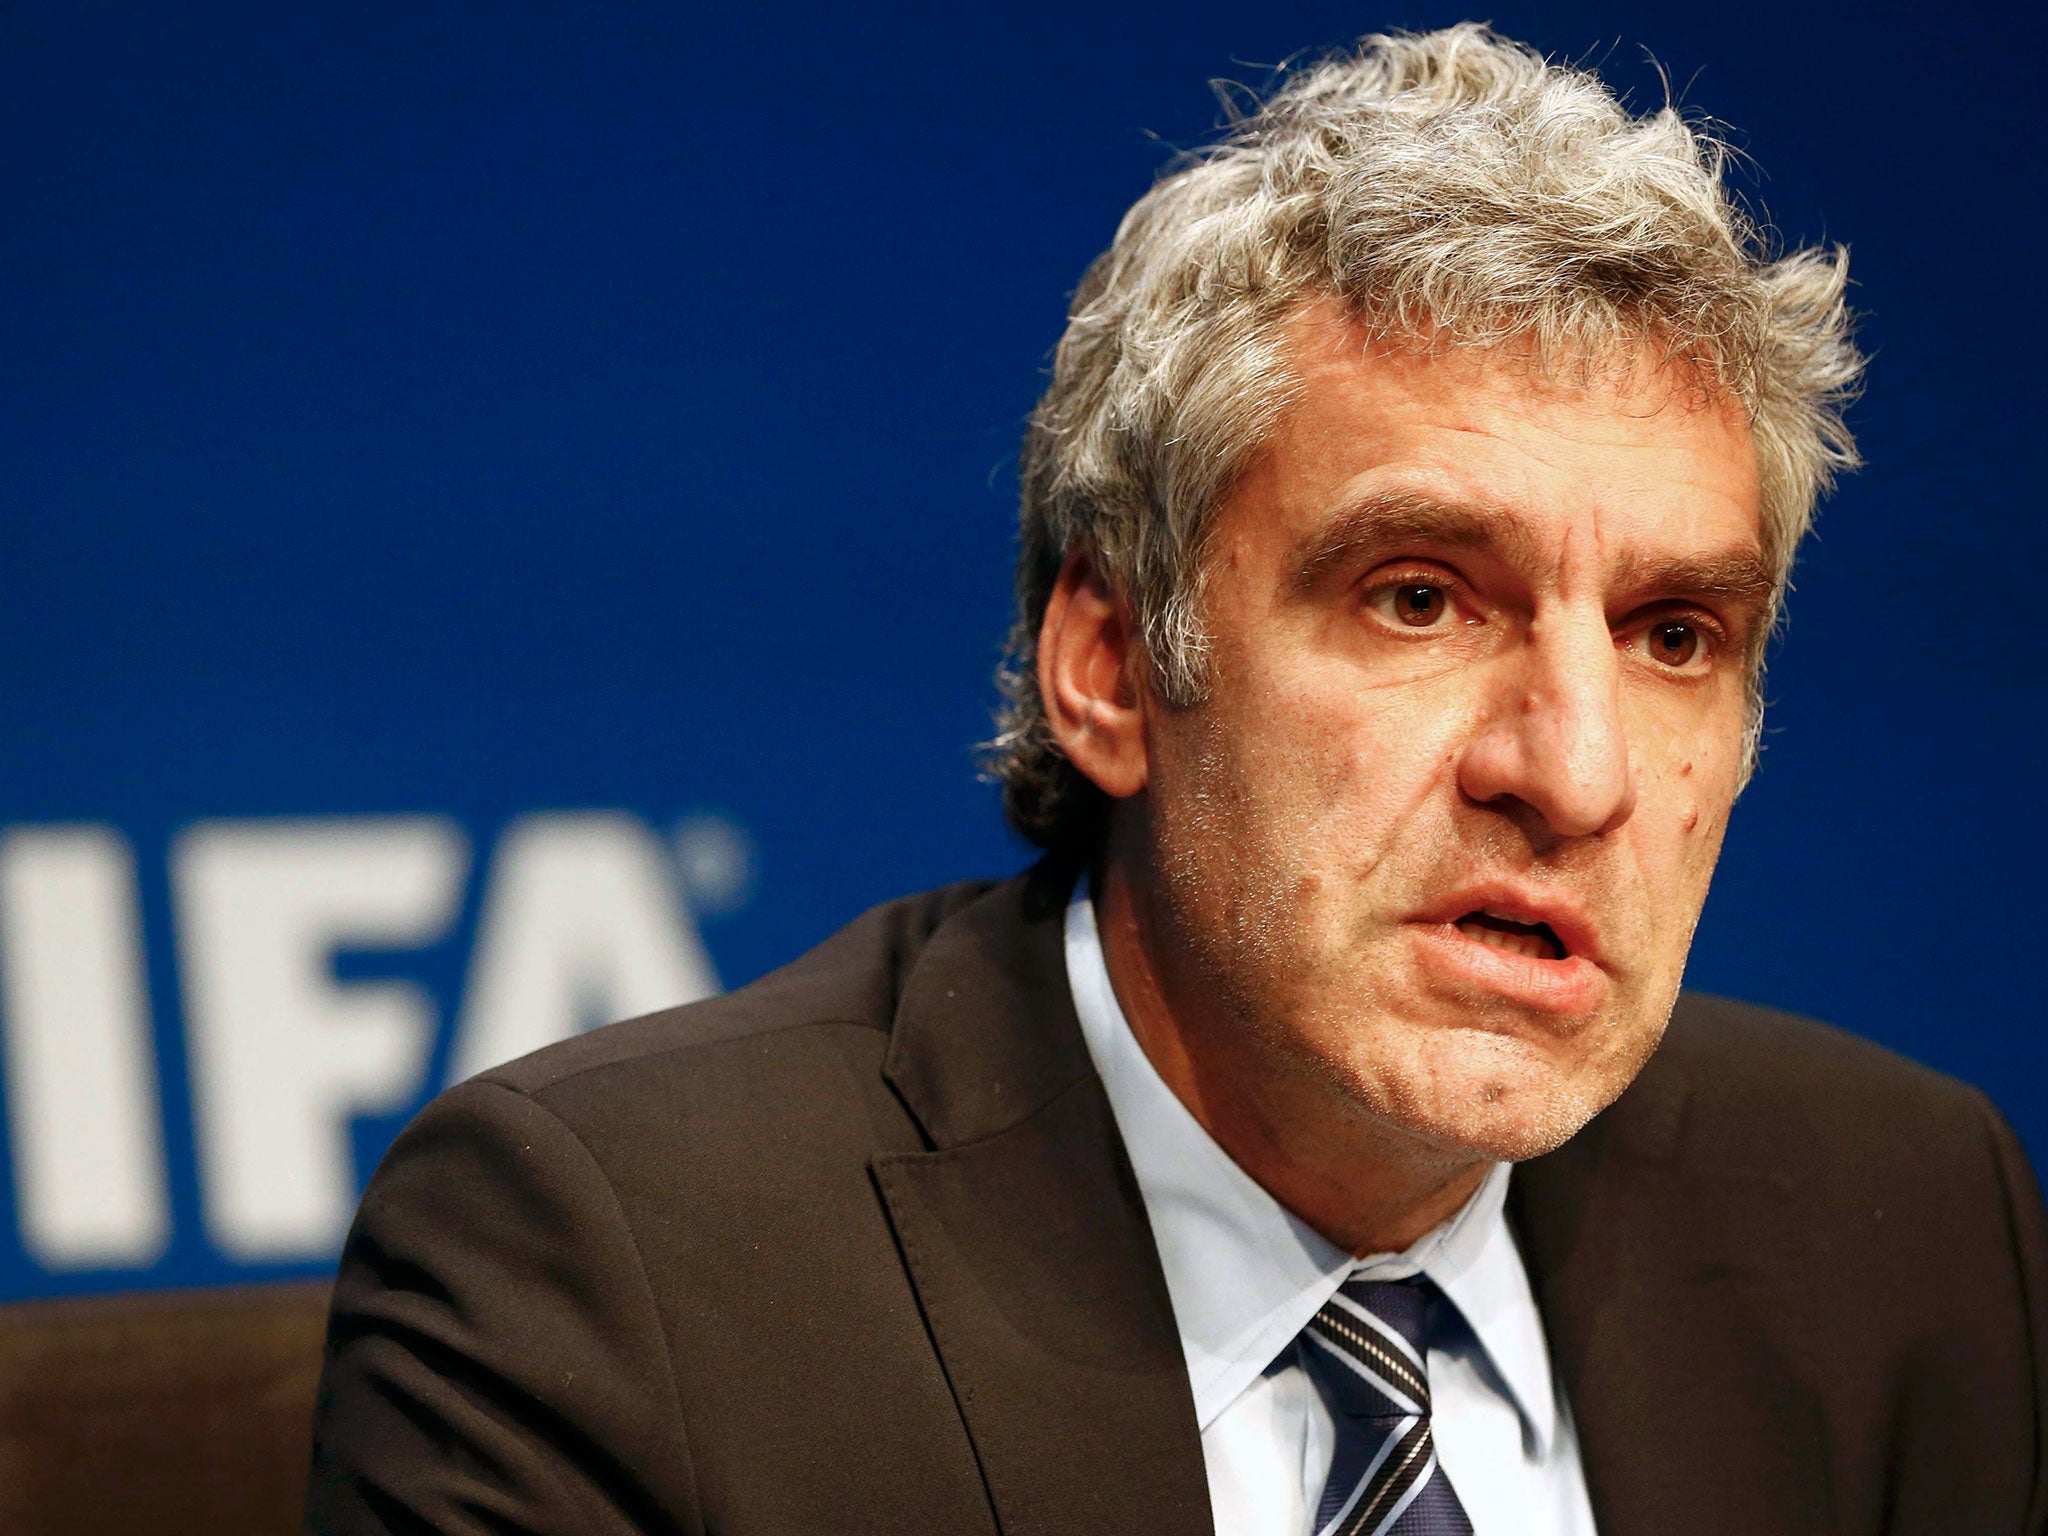 Walter De Gregorio, FIFA Director of Communications and Public Affairs addresses a news conference at FIFA headquarters in Zurich, Switzerland